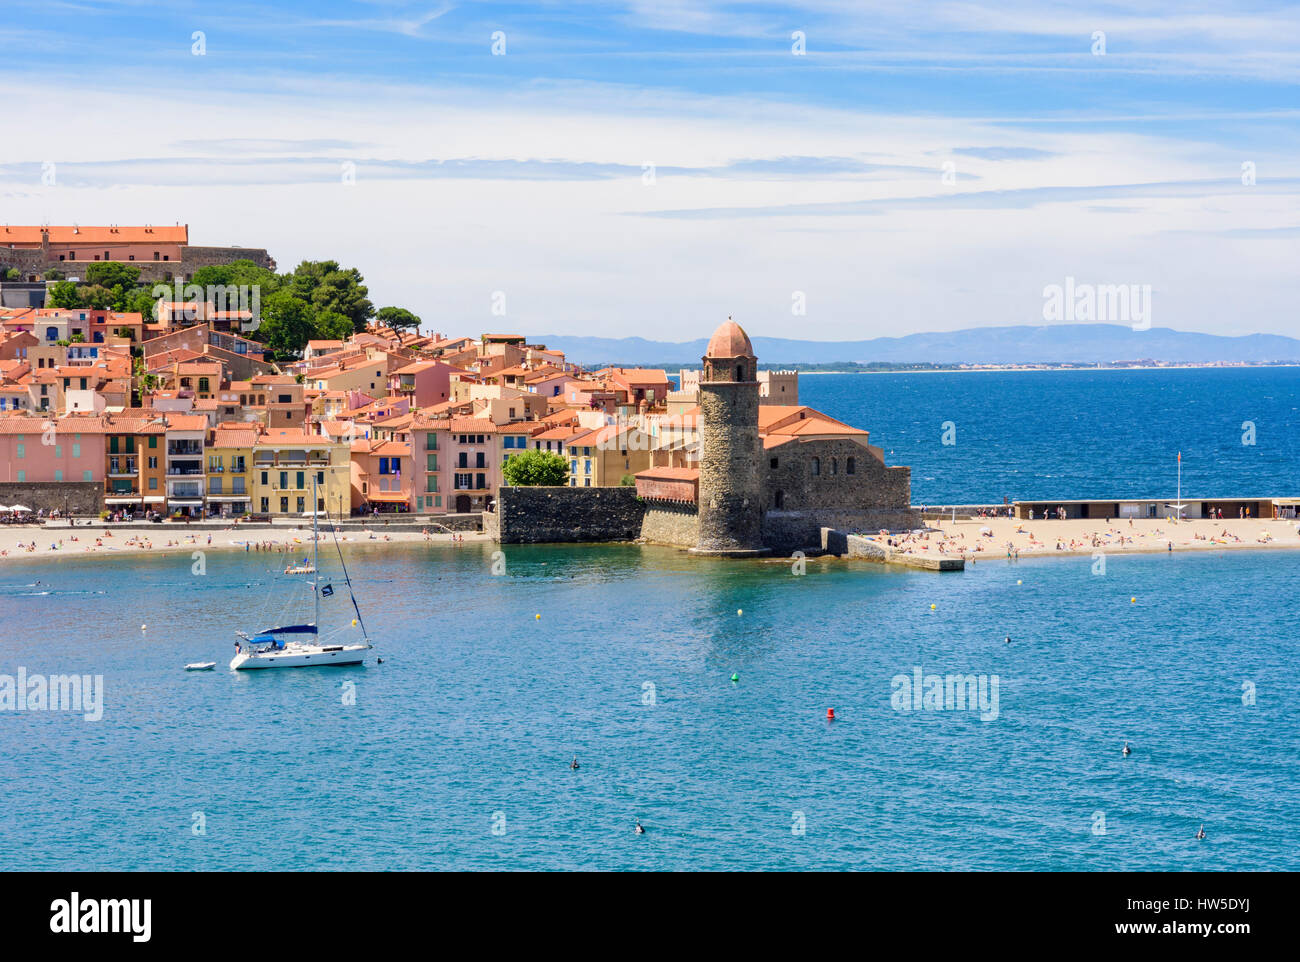 The old town and landmark bell tower of Notre Dame des Anges and yacht moored in the bay, Collioure, Côte Vermeille, France Stock Photo